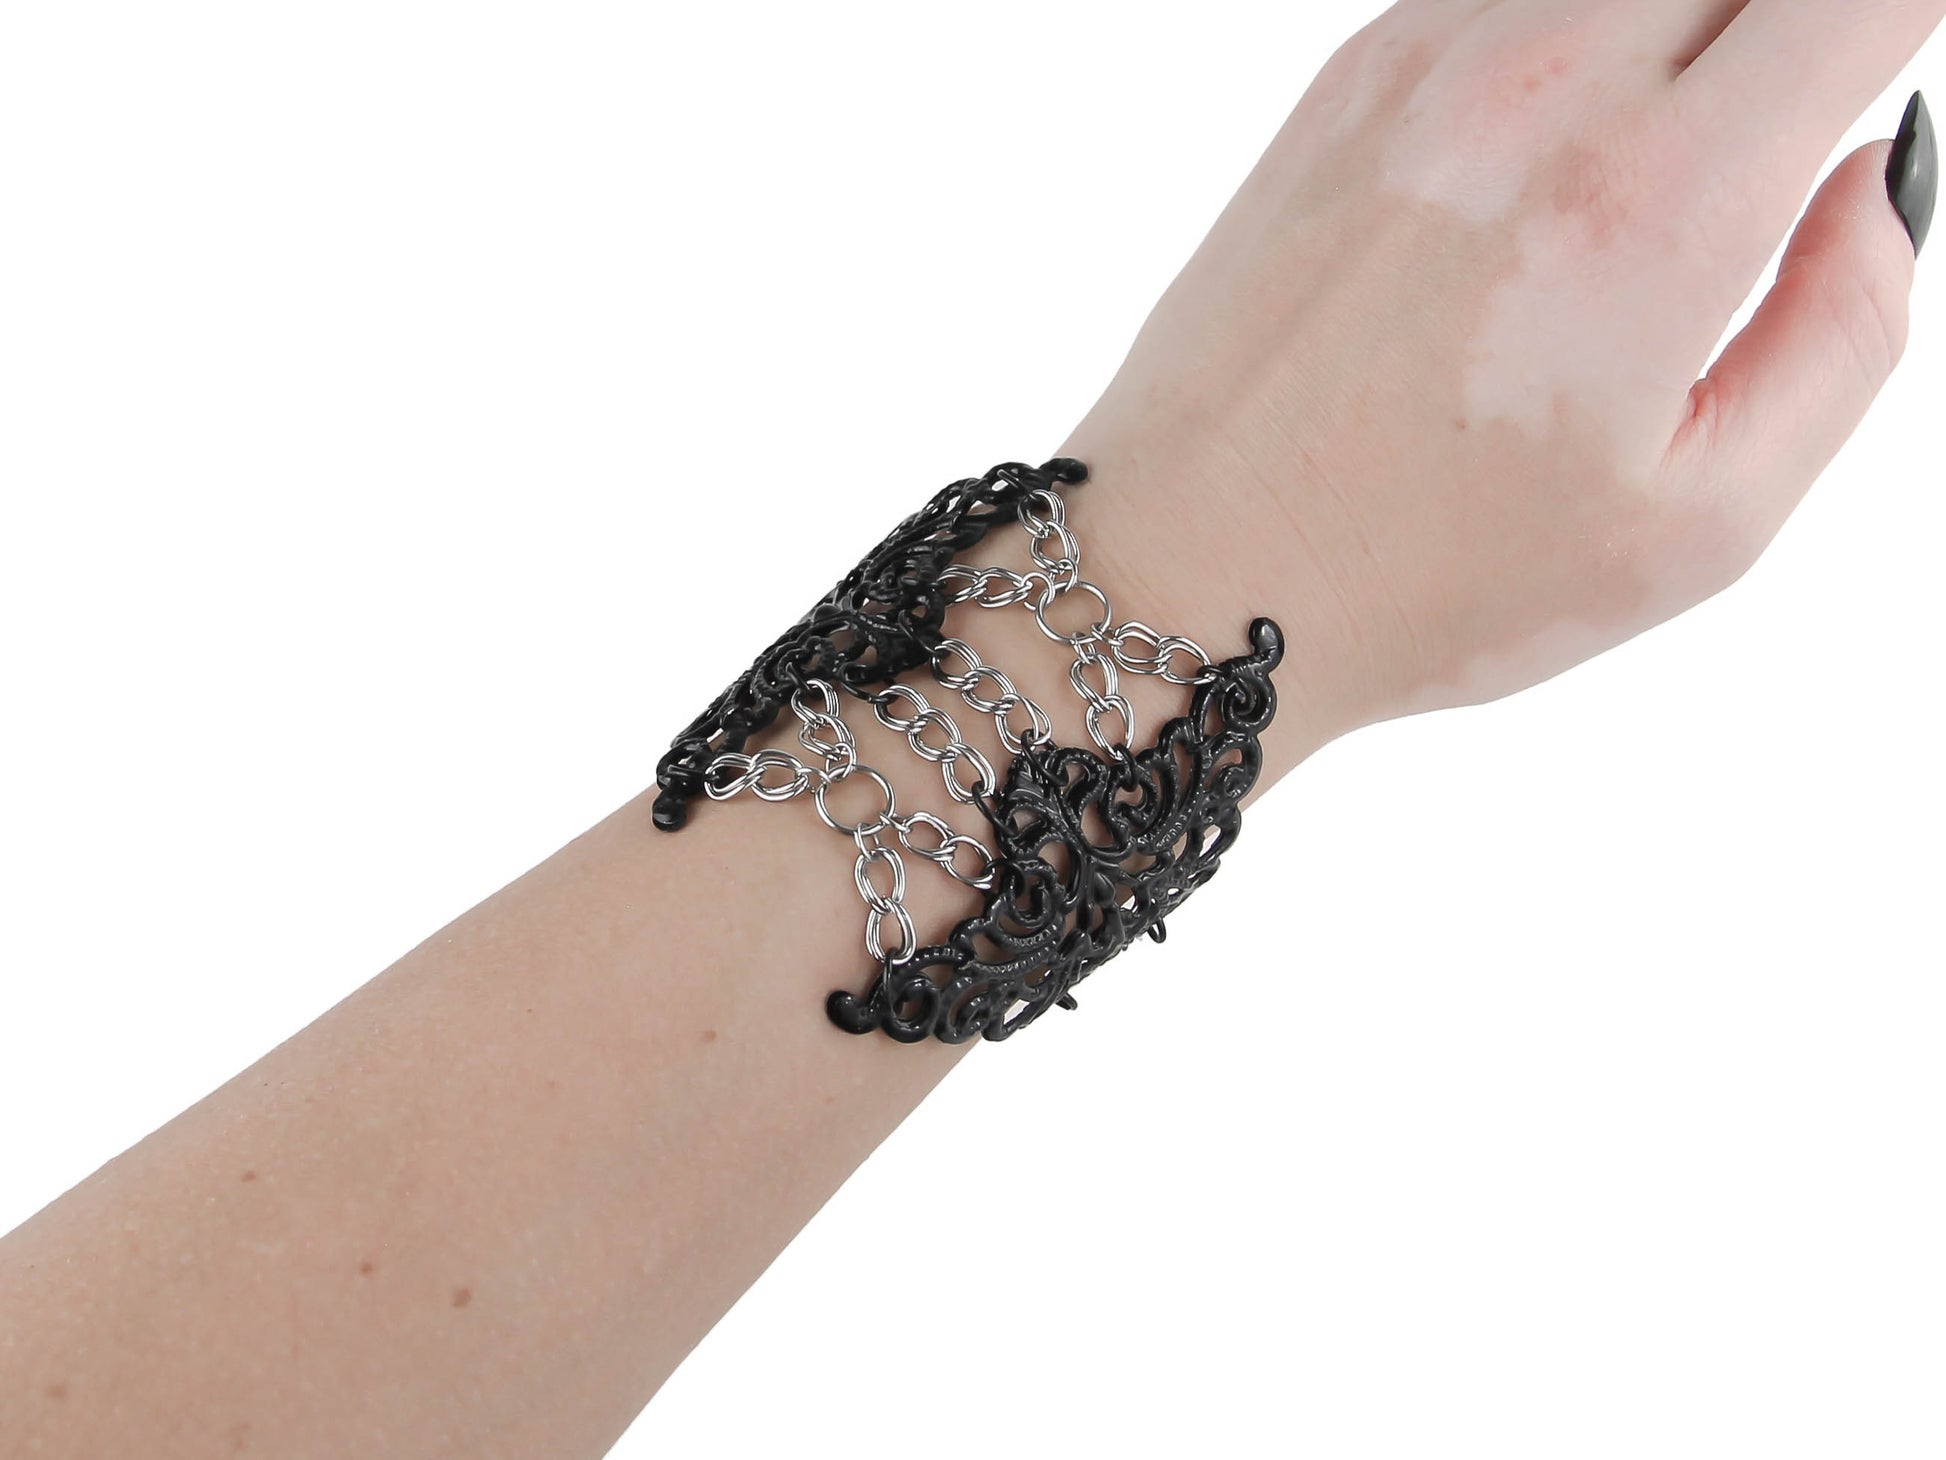 On display is a dark, intricately designed gothic bracelet from Myril Jewels, exemplifying neo-goth craftsmanship. It’s an ideal accessory for anyone drawn to the dark-avantgarde aesthetic, whether for a Halloween event, a bold statement at a rave party, or as a distinctive everyday piece.